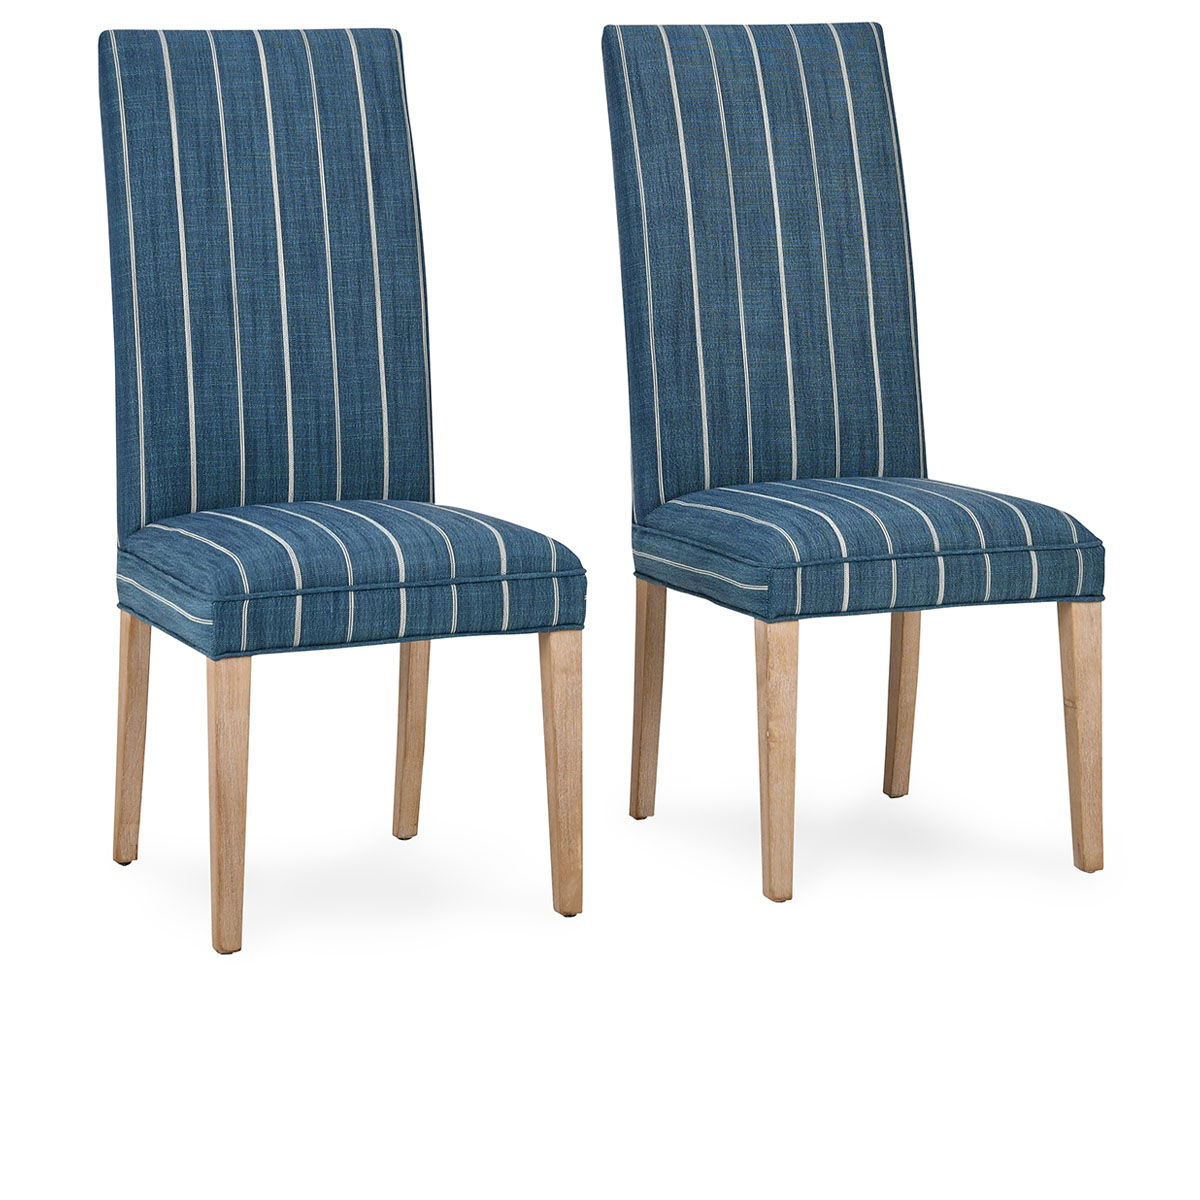 Muriel - Upholstered Dining Chair (Set of 2) - Navy Blue